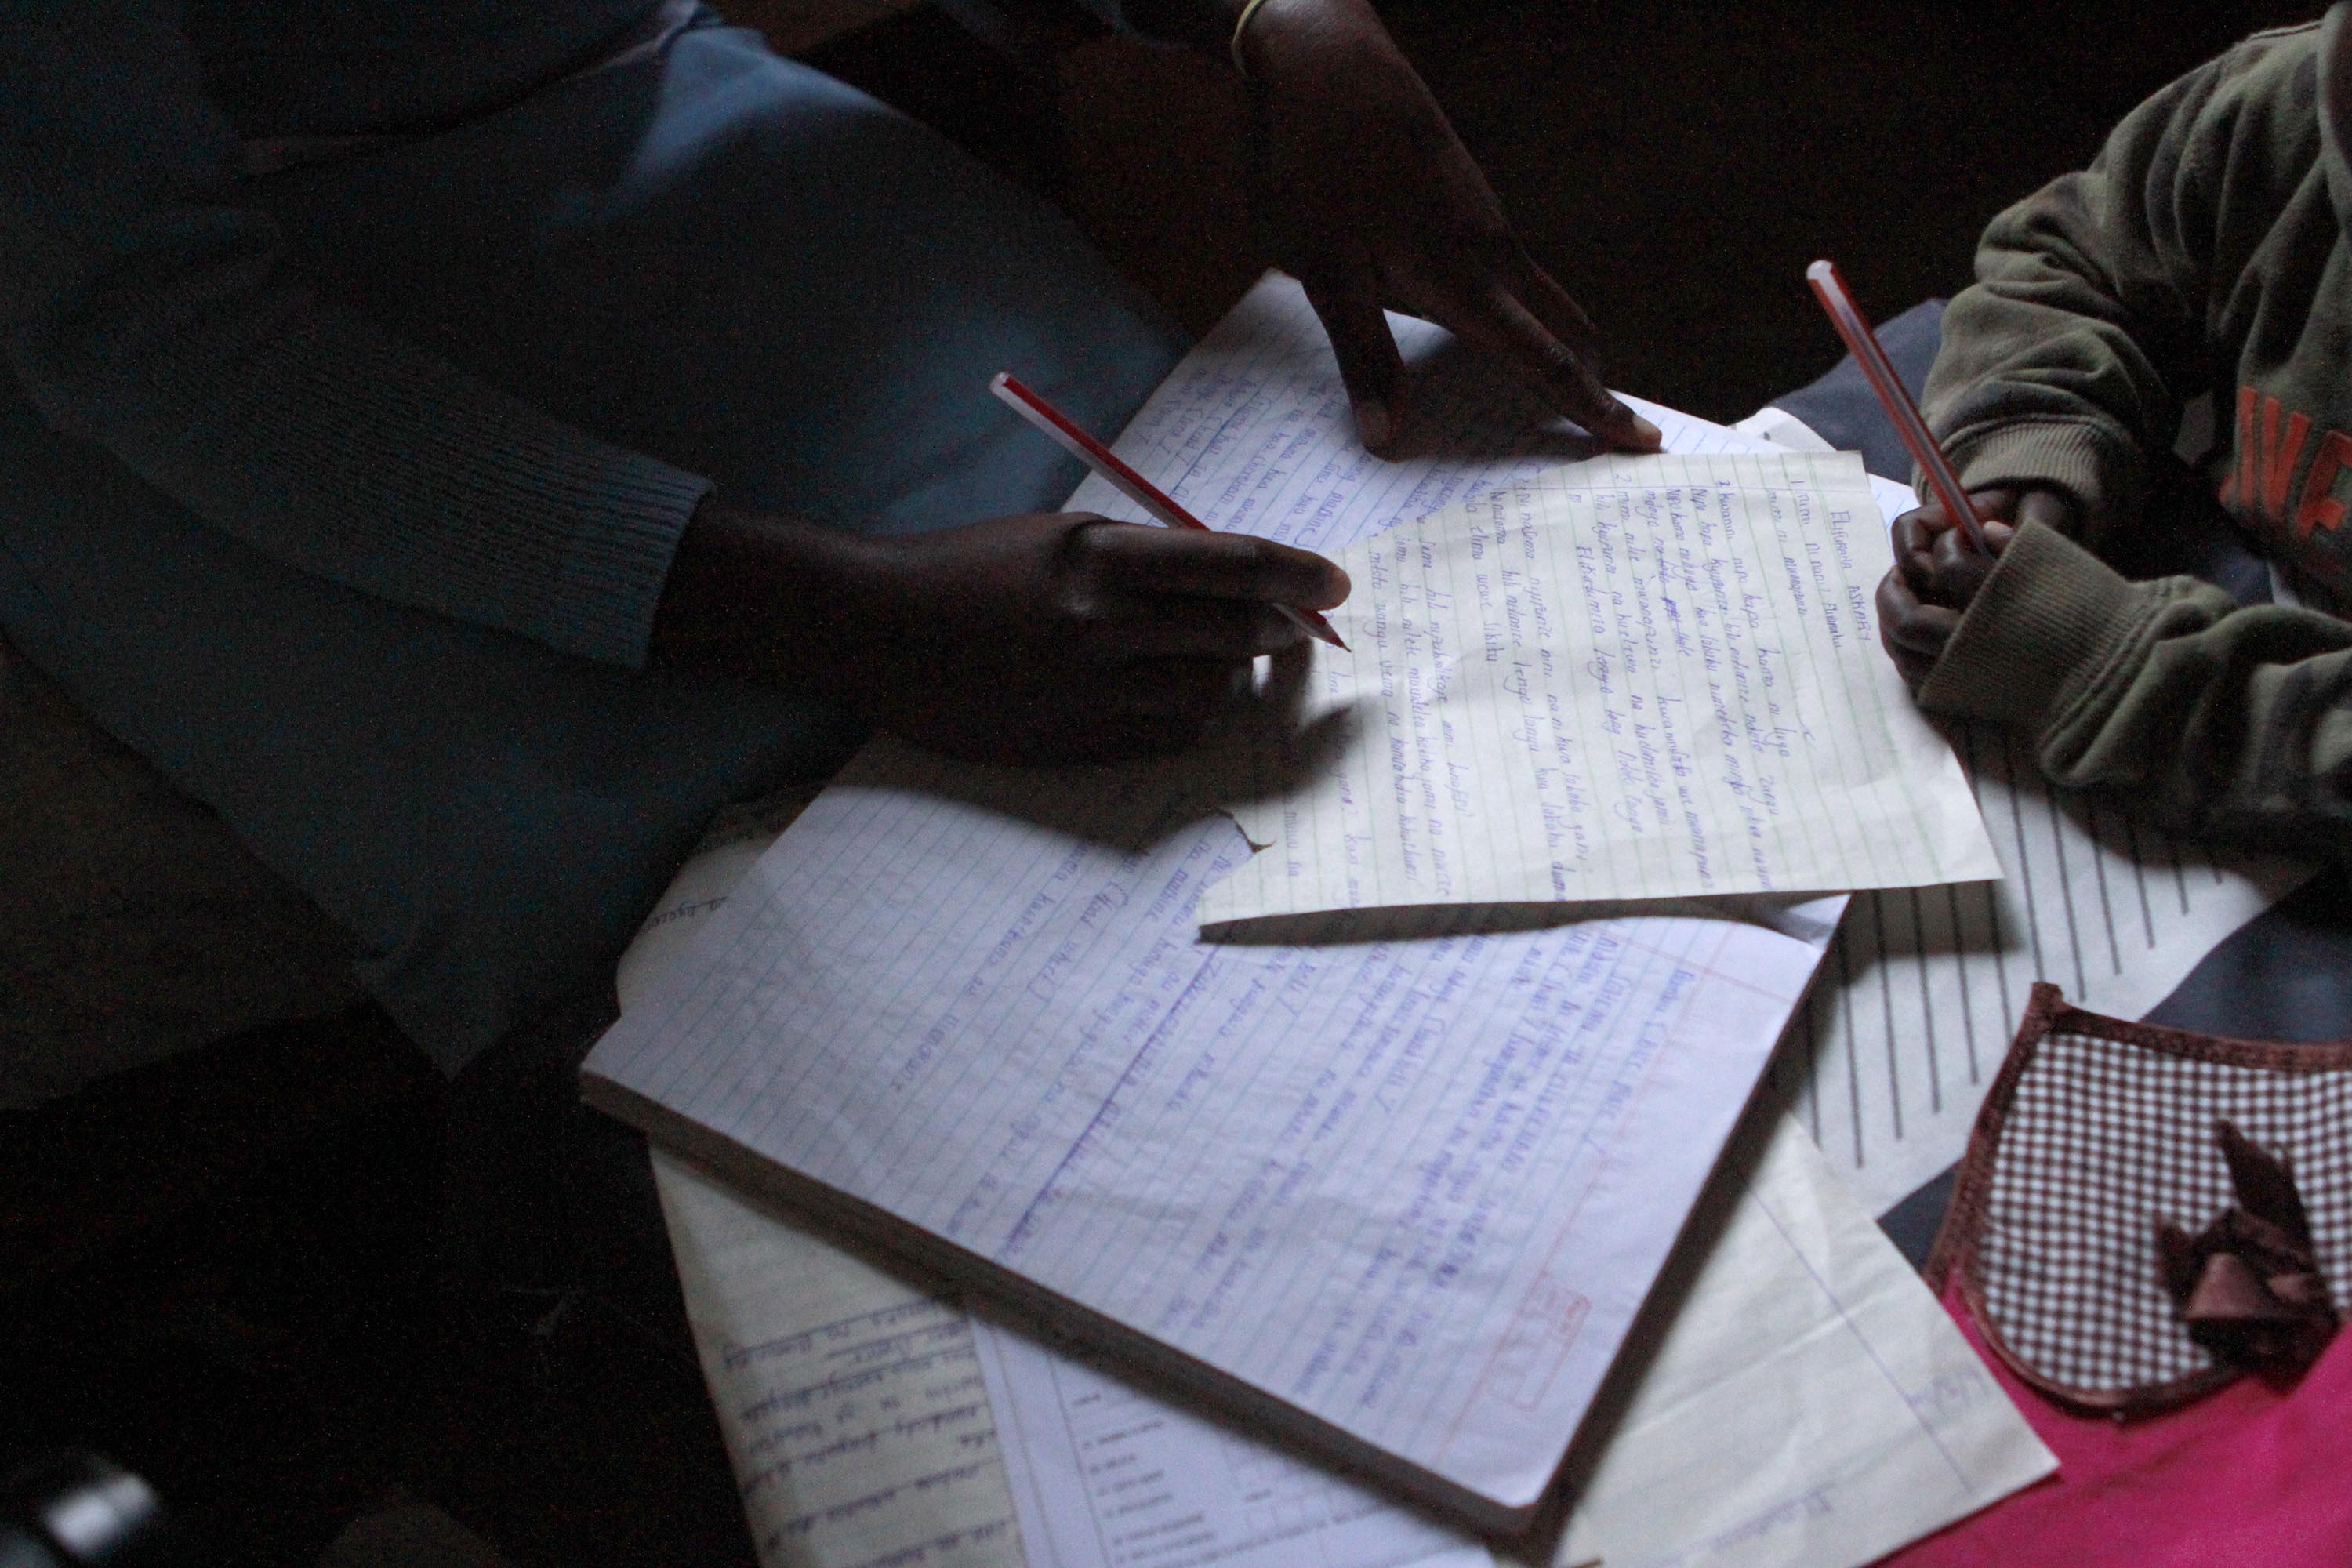 Elifuraha&#39;s son watches, pencil in hand, as she flips through her notes from a tailoring class at the Faraja Center.